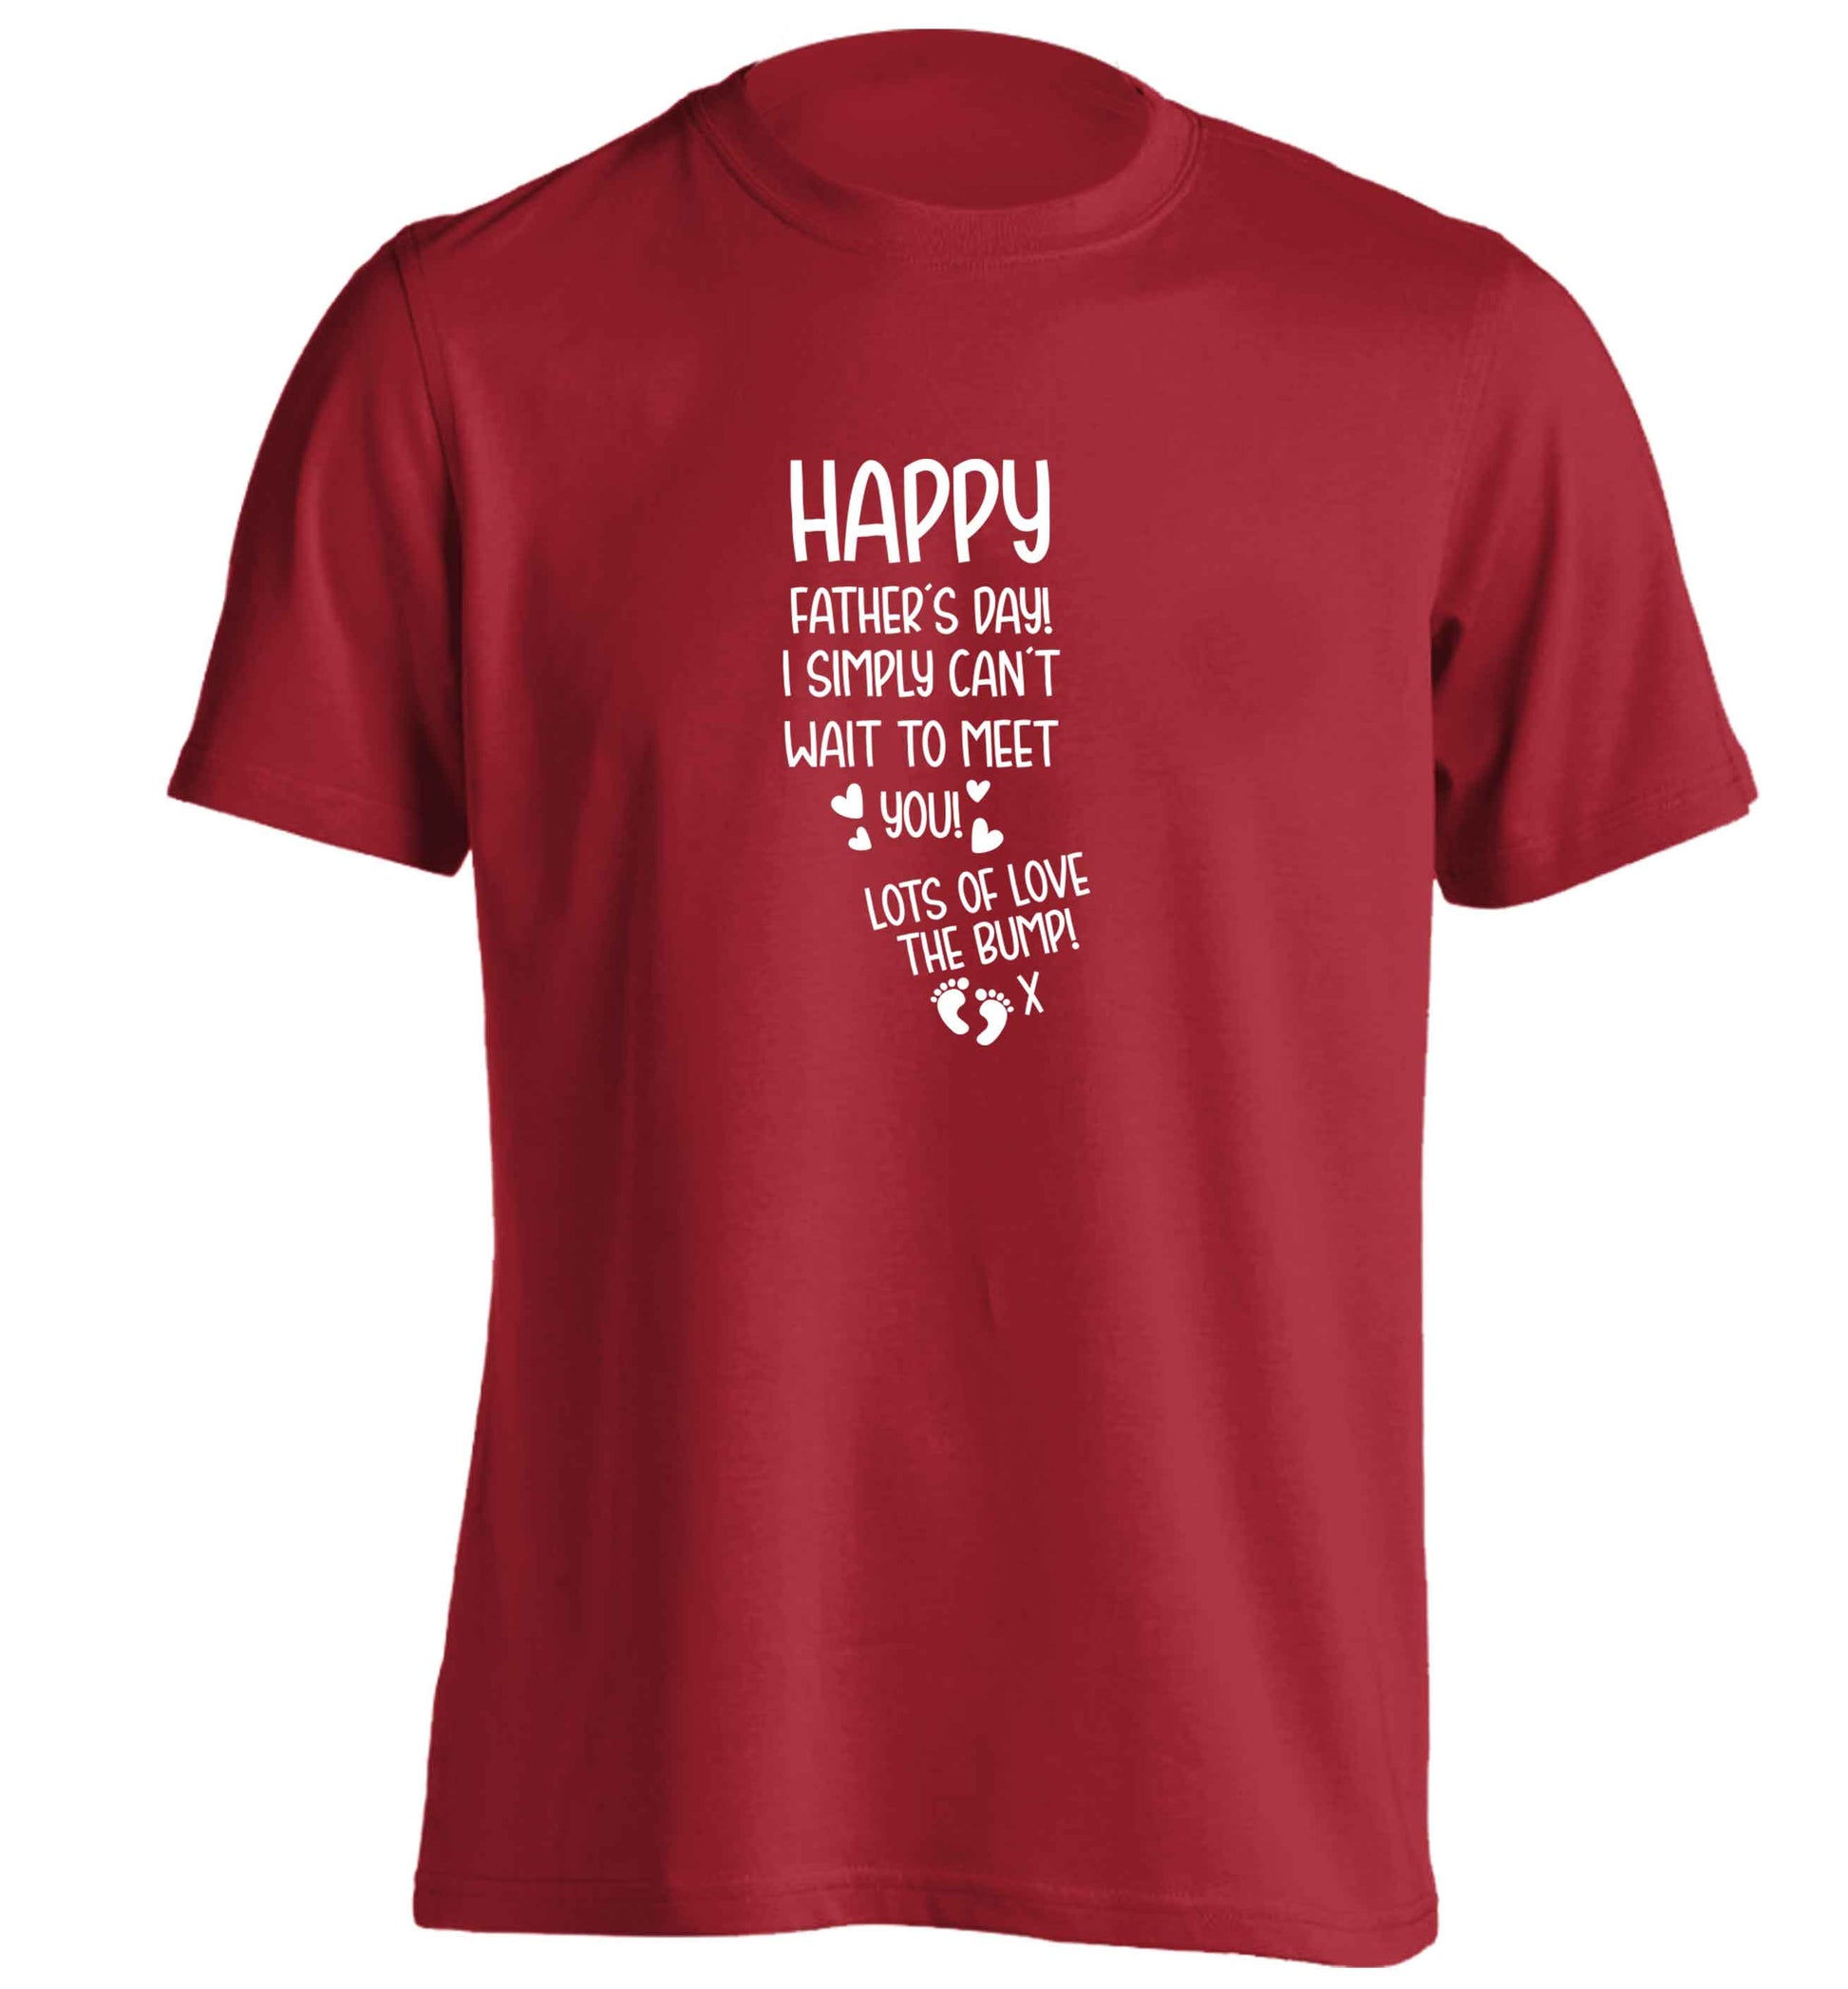 Happy Father's day daddy I can't wait to meet you lot's of love the bump! adults unisex red Tshirt 2XL